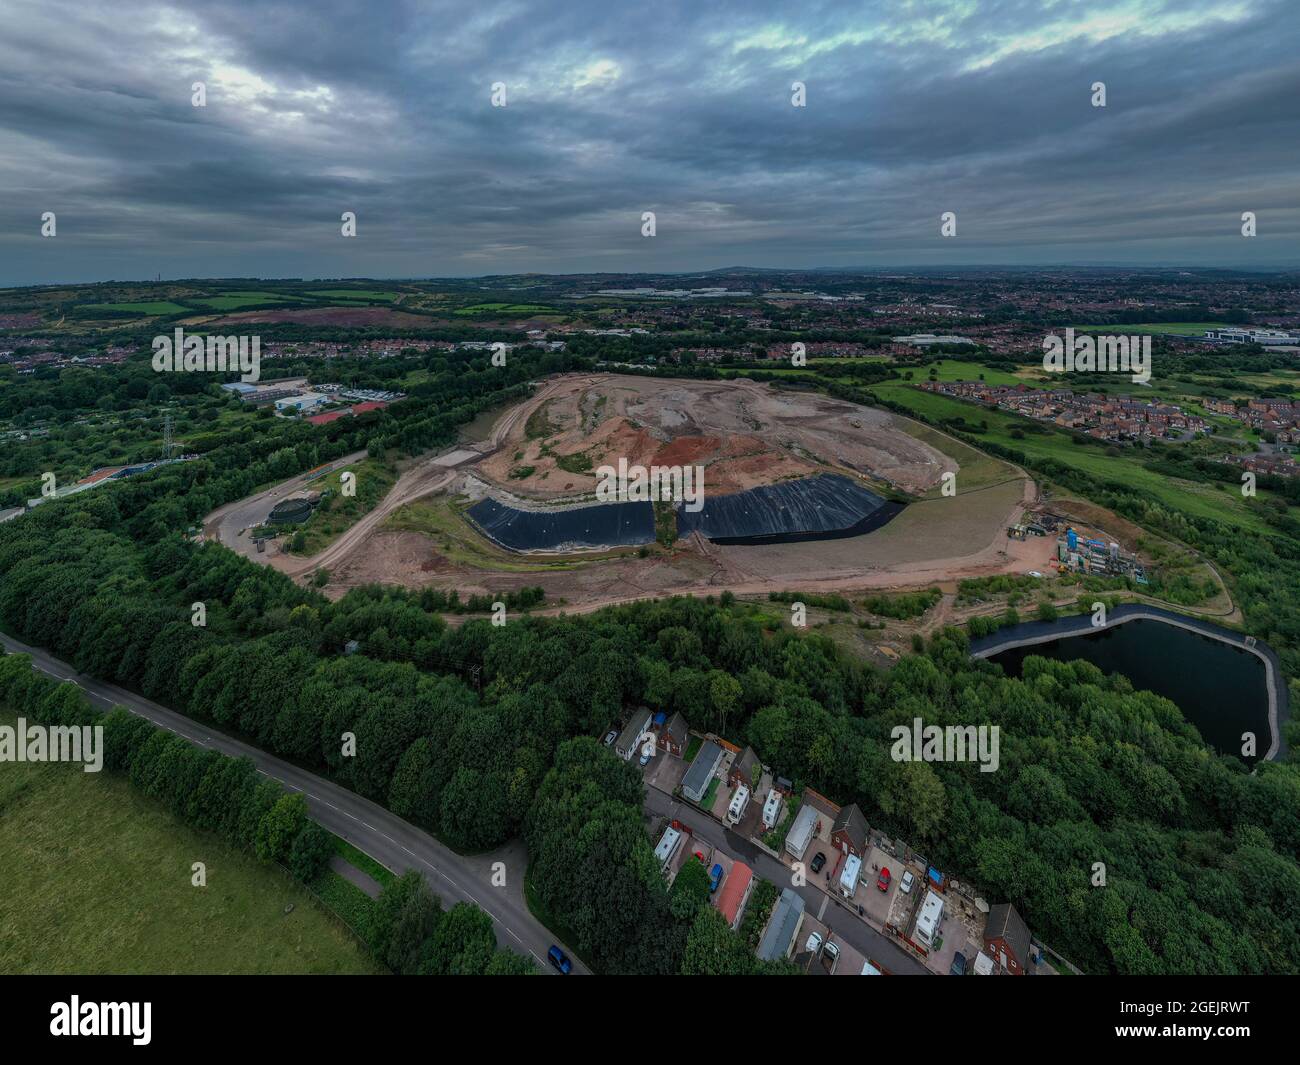 Stop the Stink, Walley’s Quarry Landfill Silverdale Newcastle Stoke on Trent Aerial Birds Eye Visualizza le immagini ideali per i News Reports Foto Stock